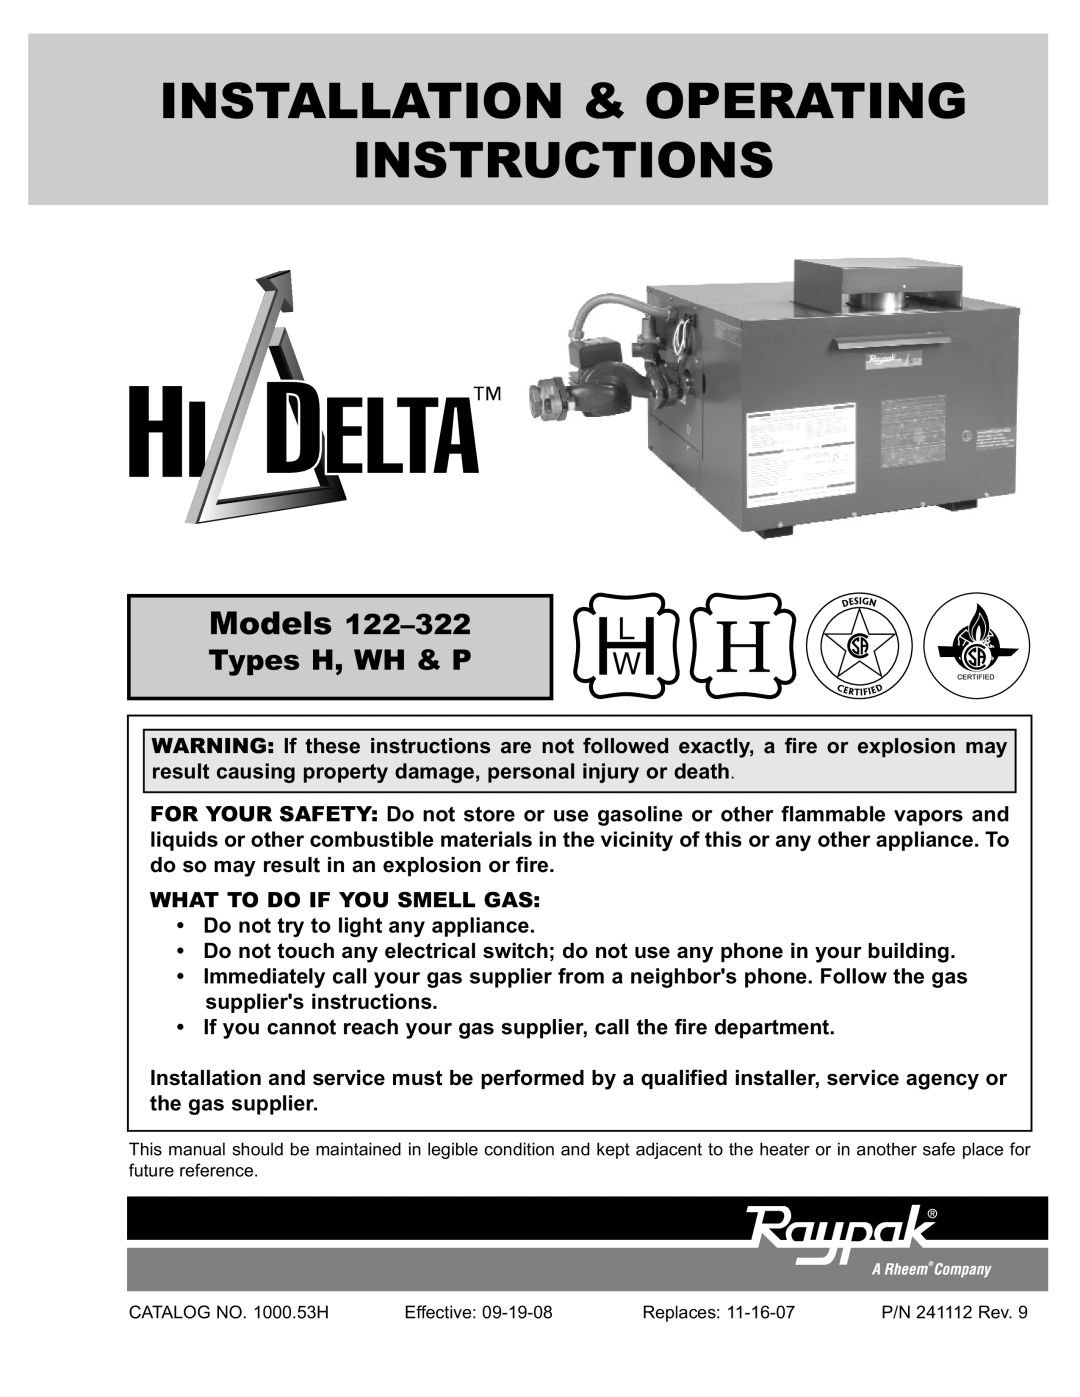 Raypak manual What To Do If You Smell Gas, Do not try to light any appliance, Models 122-322Types H, WH & P 